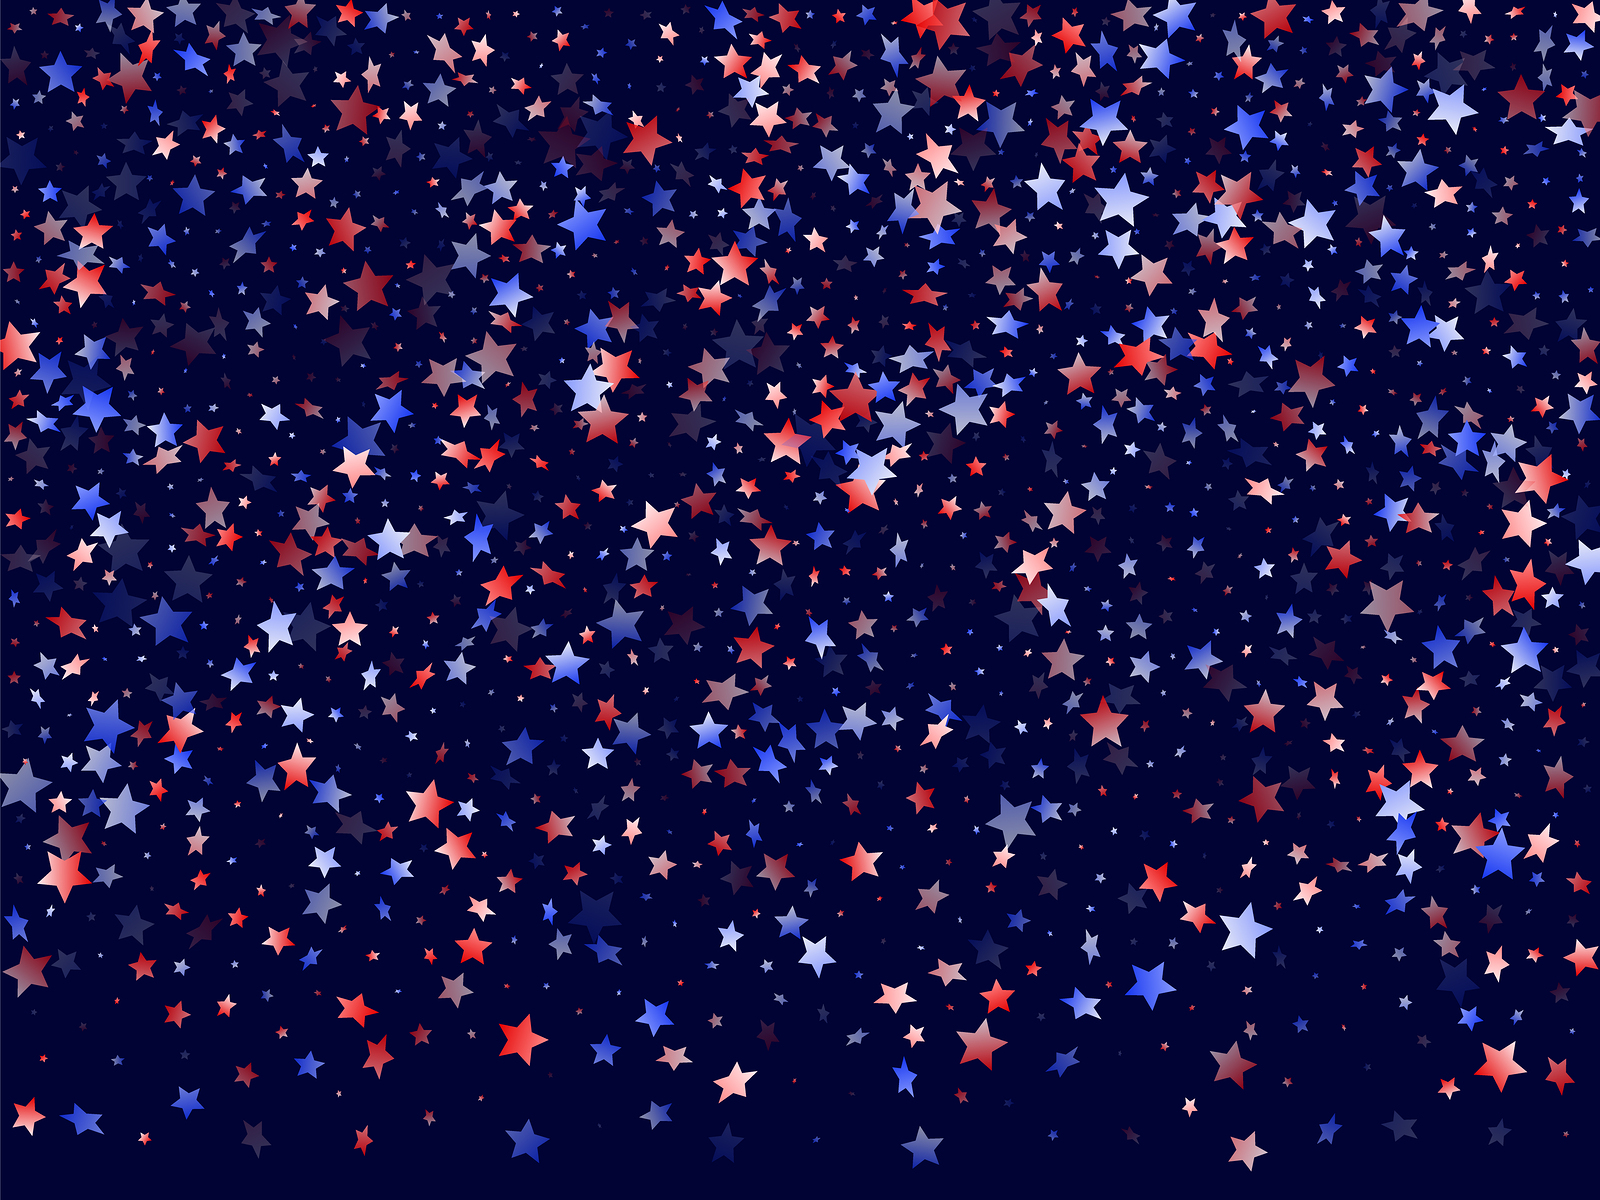 American Patriot Day stars background. Holiday confetti in USA flag colors for Patriot Day. Gradiental red blue white stars on dark American patriotic vector. 4th of July holiday stardust.